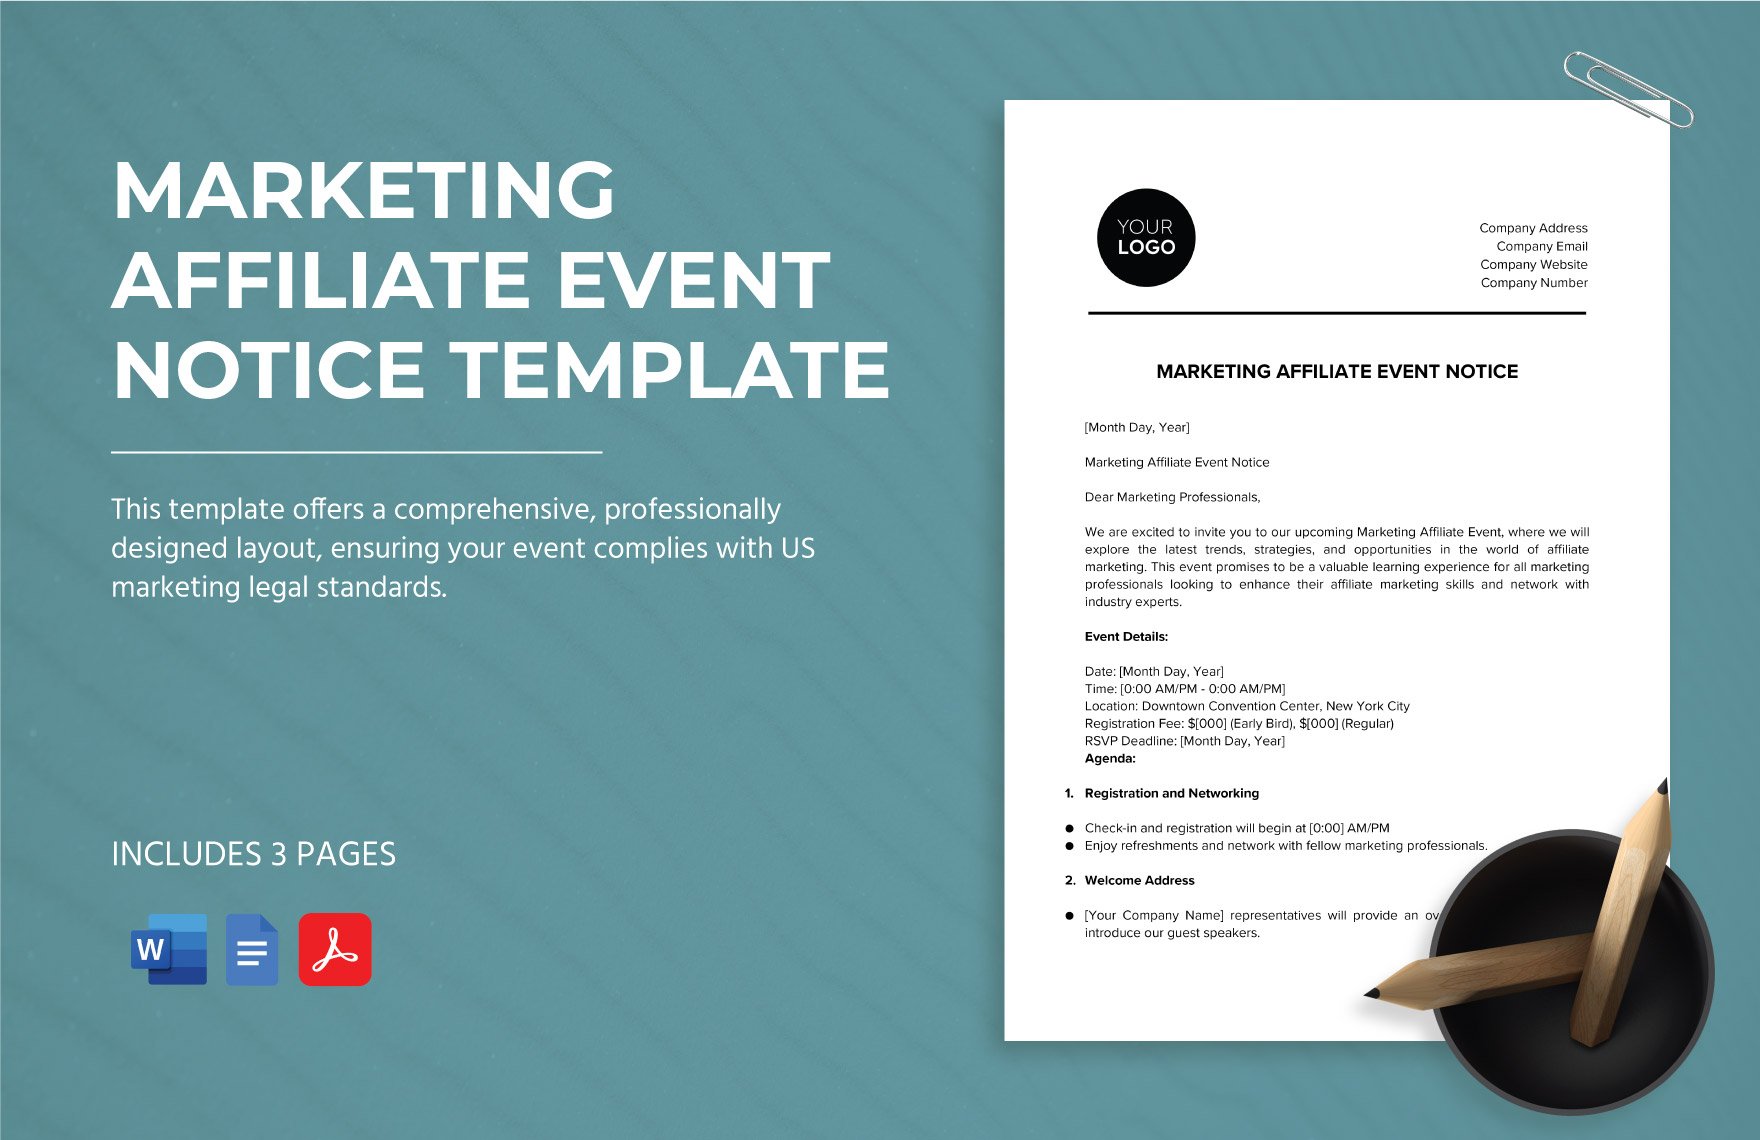 Marketing Affiliate Event Notice Template in Word, Google Docs, PDF